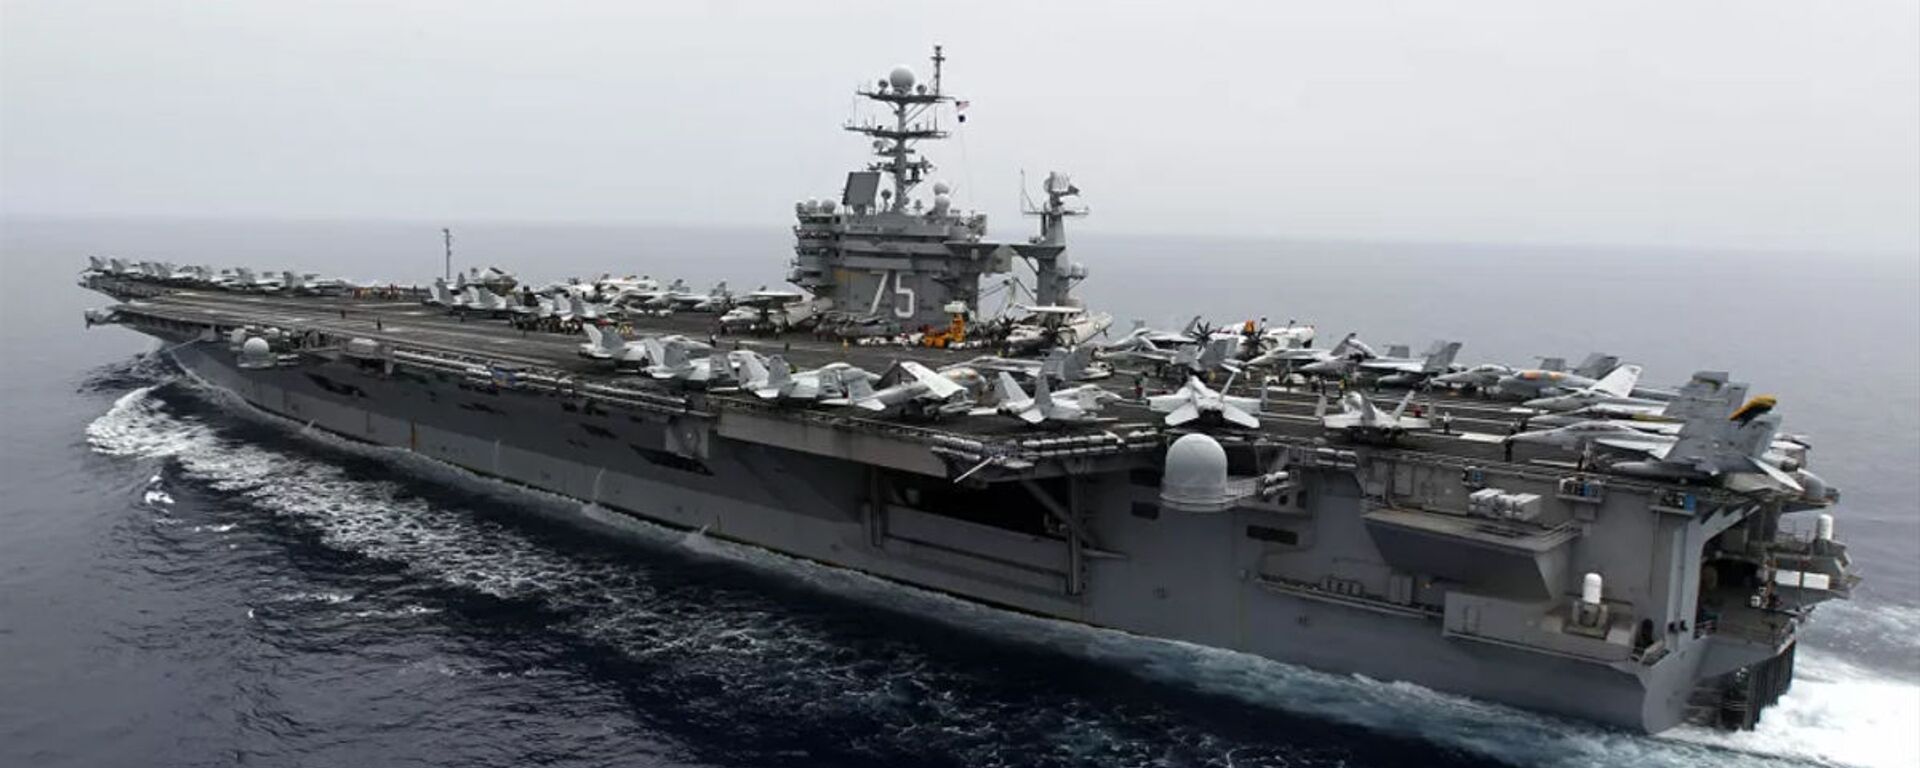 A general view shows the nuclear-powered aircraft carrier USS Harry S. Truman at an undisclosed position in the Mediterranean Sea, south of Sicily, Monday June 14, 2010 - 俄罗斯卫星通讯社, 1920, 20.01.2022